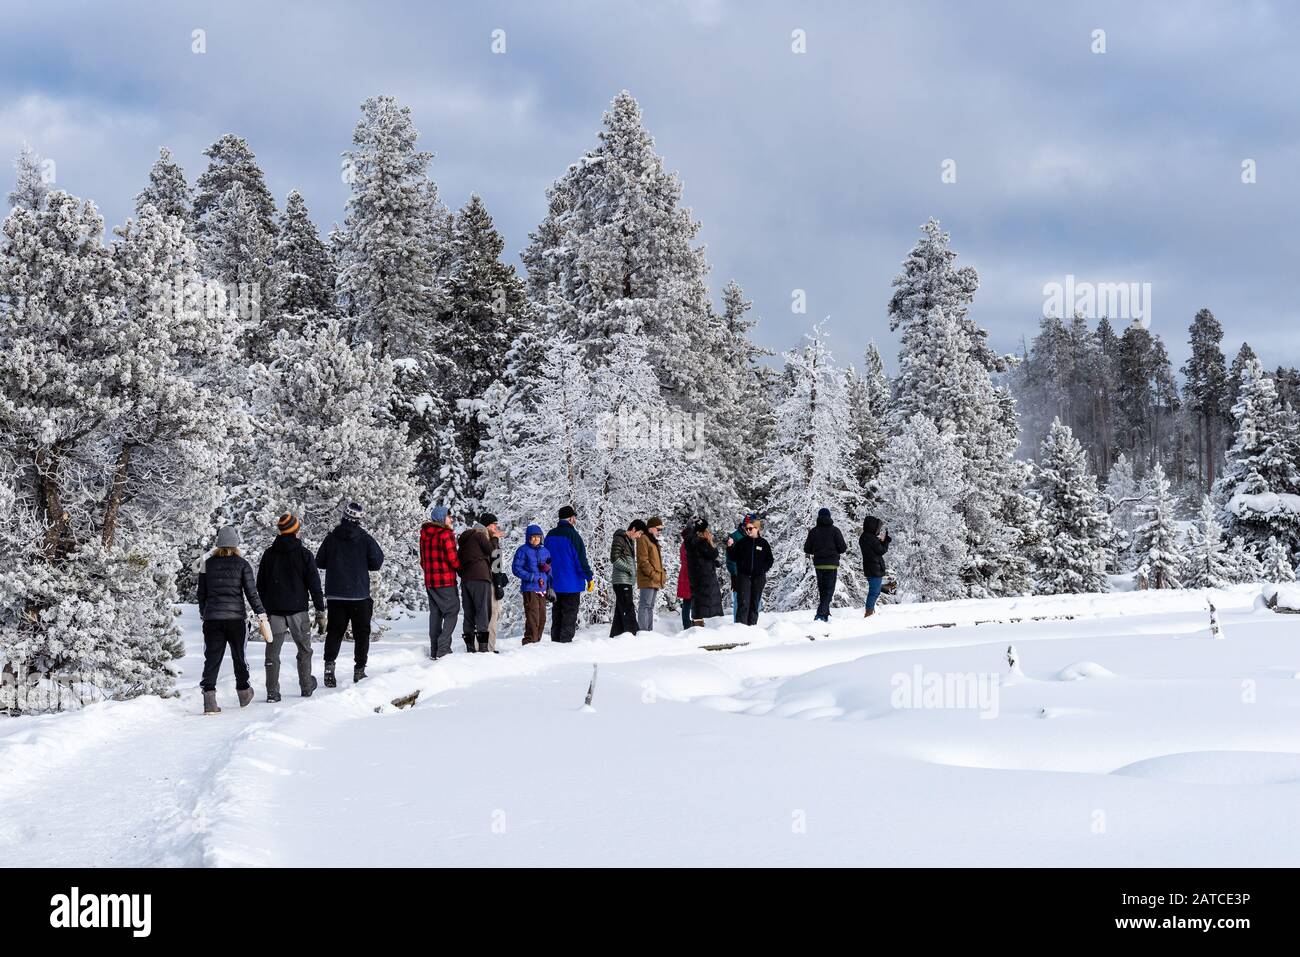 Winter tourism becomes a major attraction in the Yellowstone National Park, Wyoming, USA Stock Photo